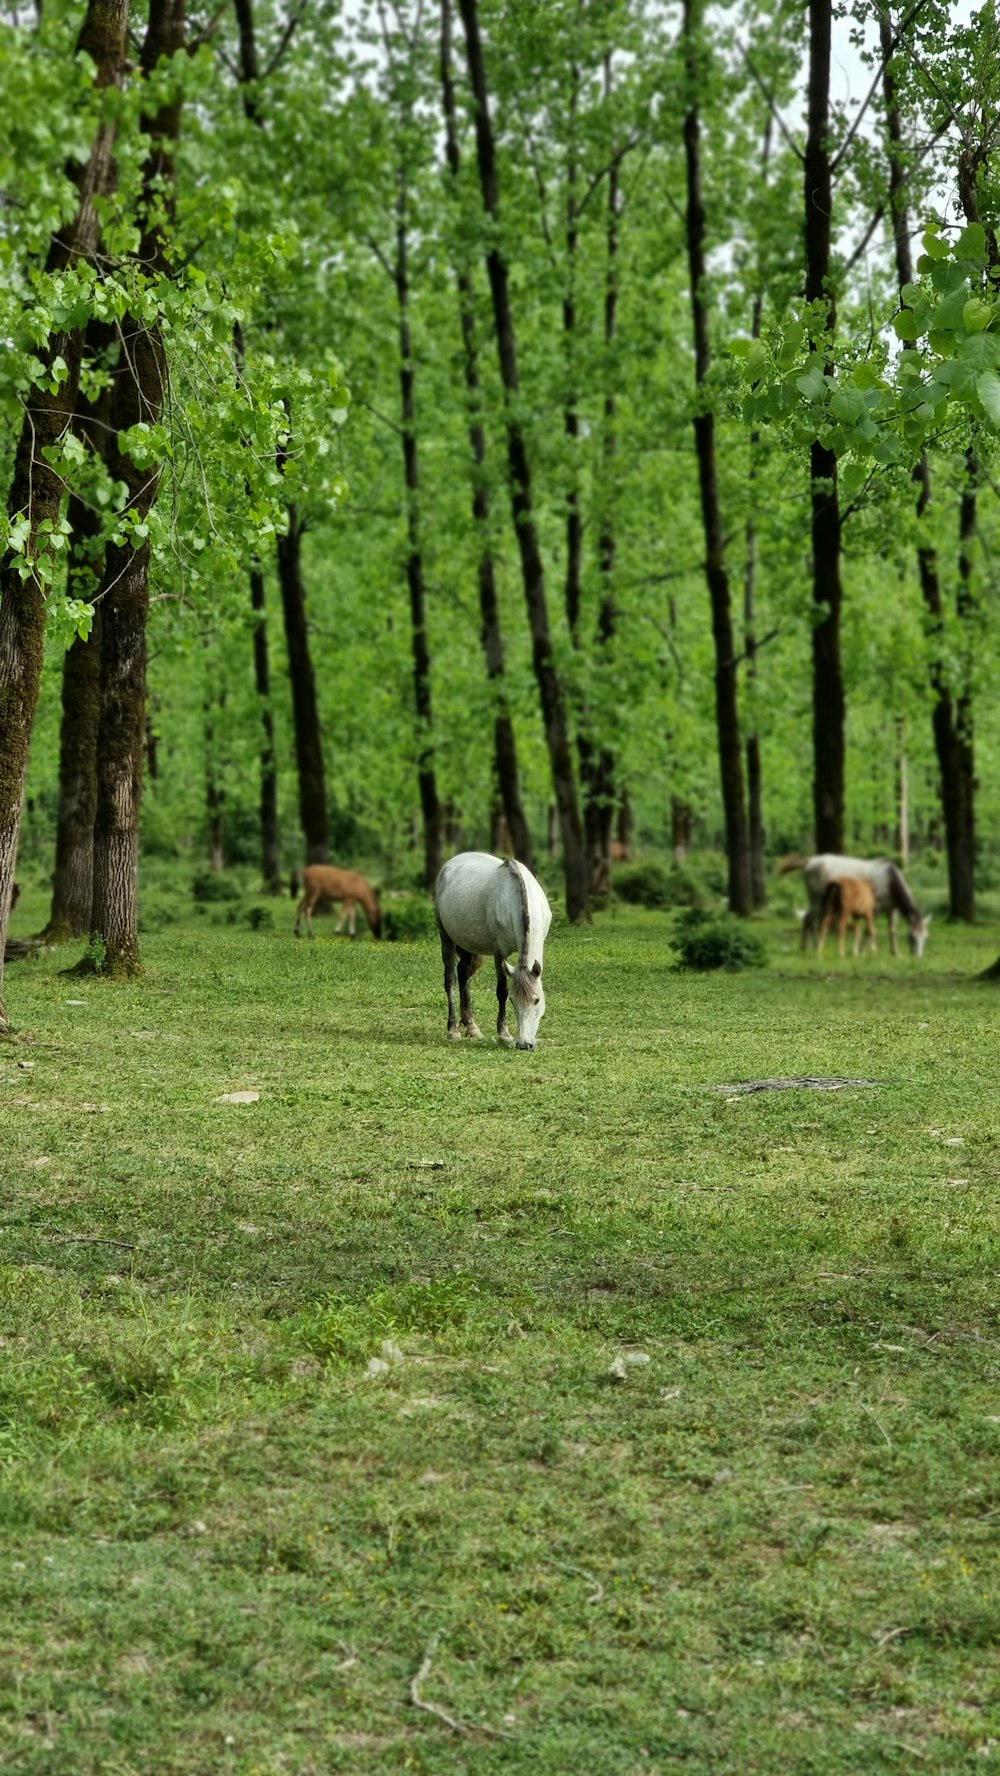 a horse grazing in a field with other horses in the background